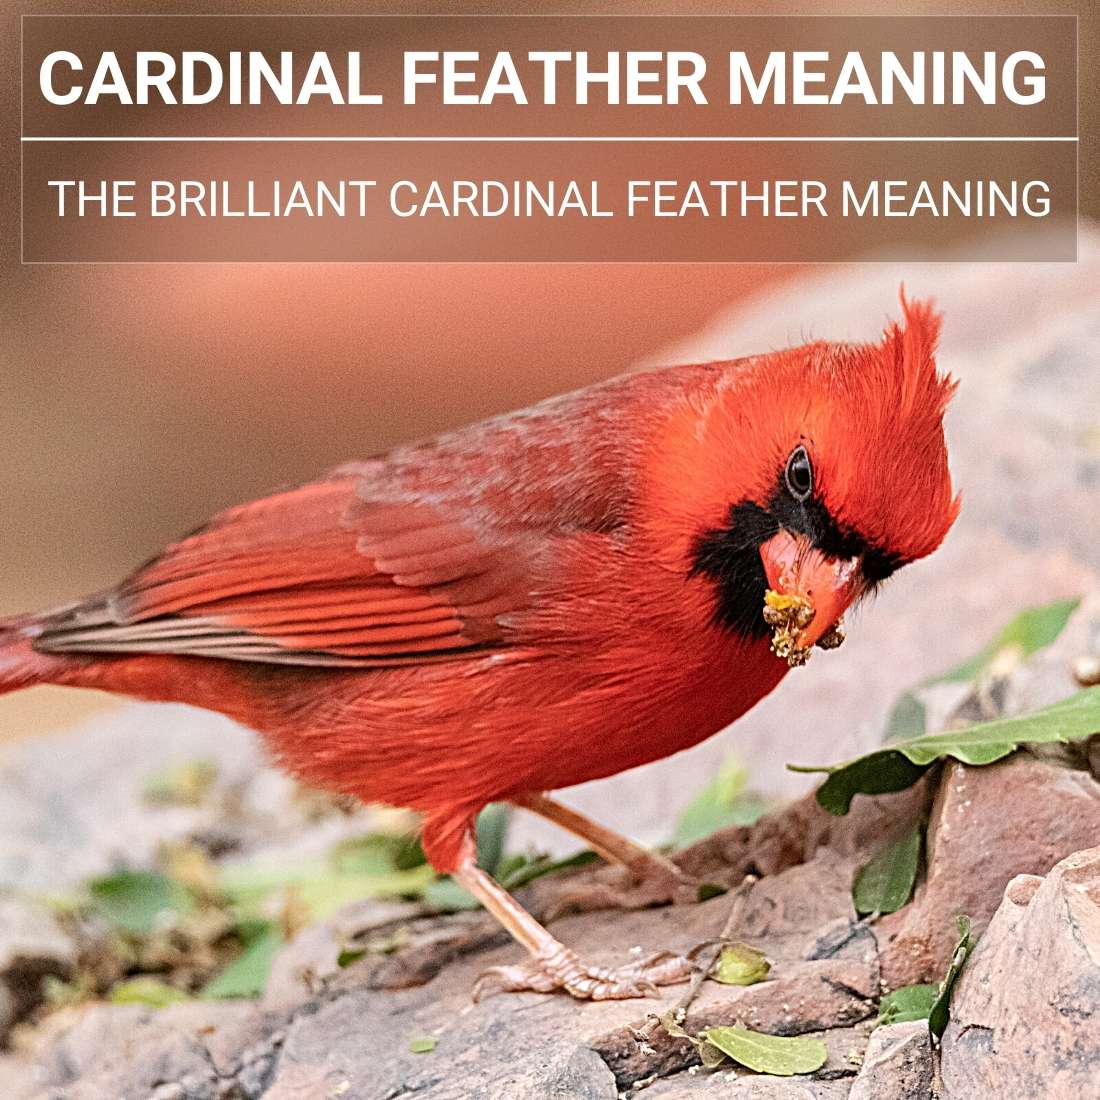 Cardinal feather meaning